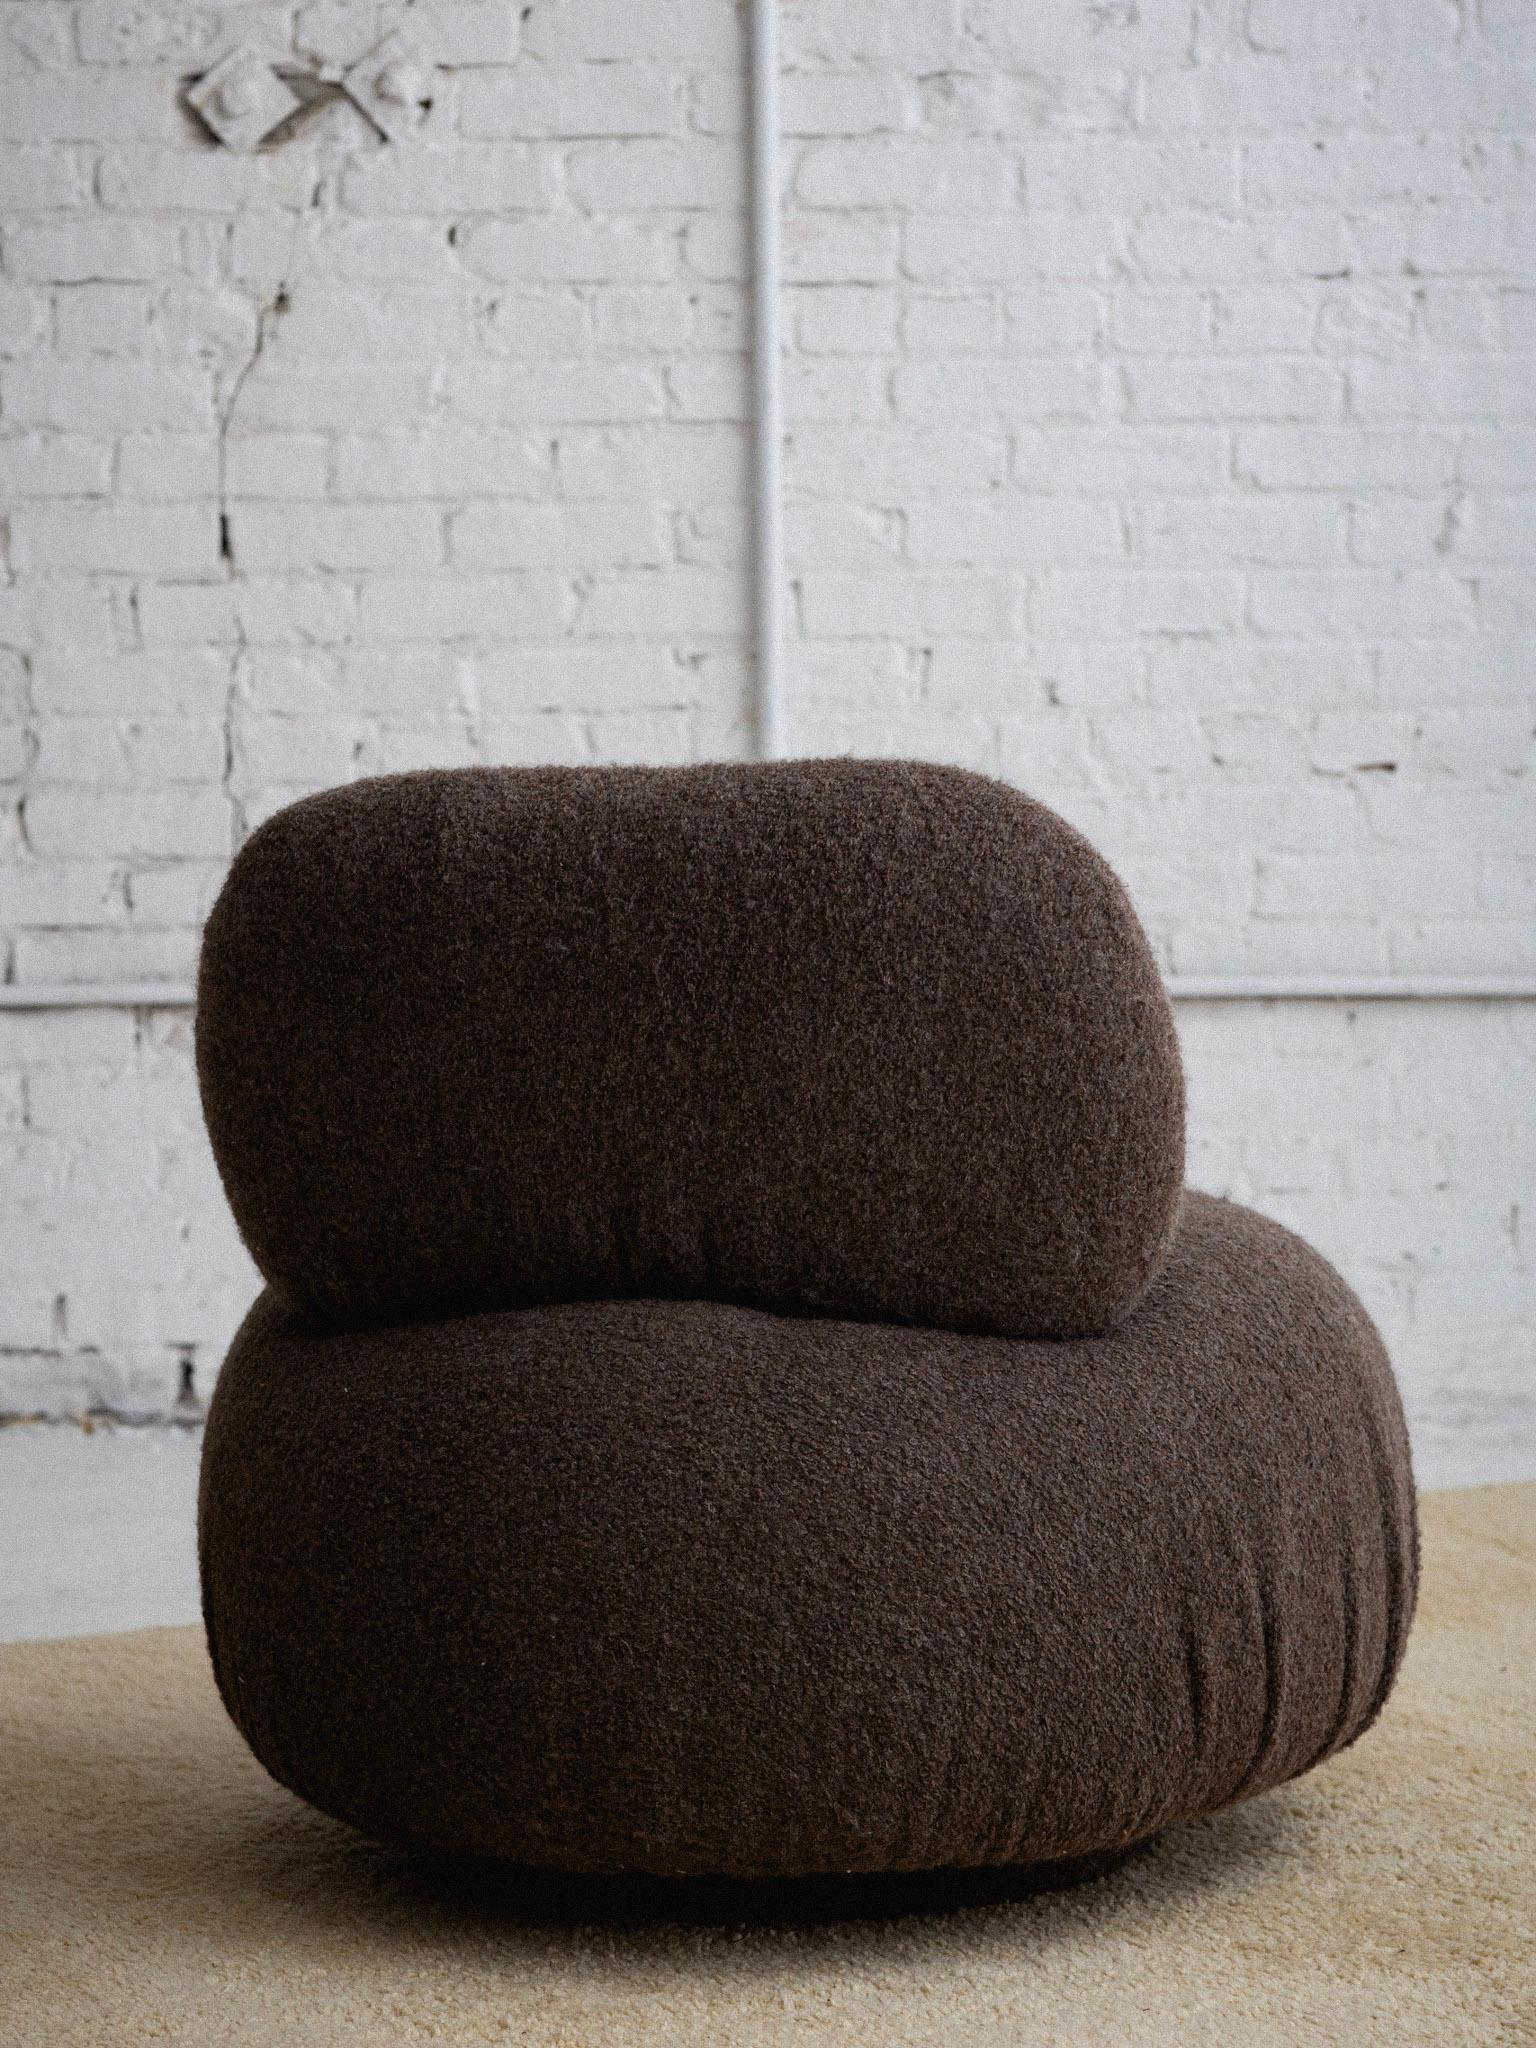 American Post Modern Swivel Pouf Chair in the Style of Steve Chase